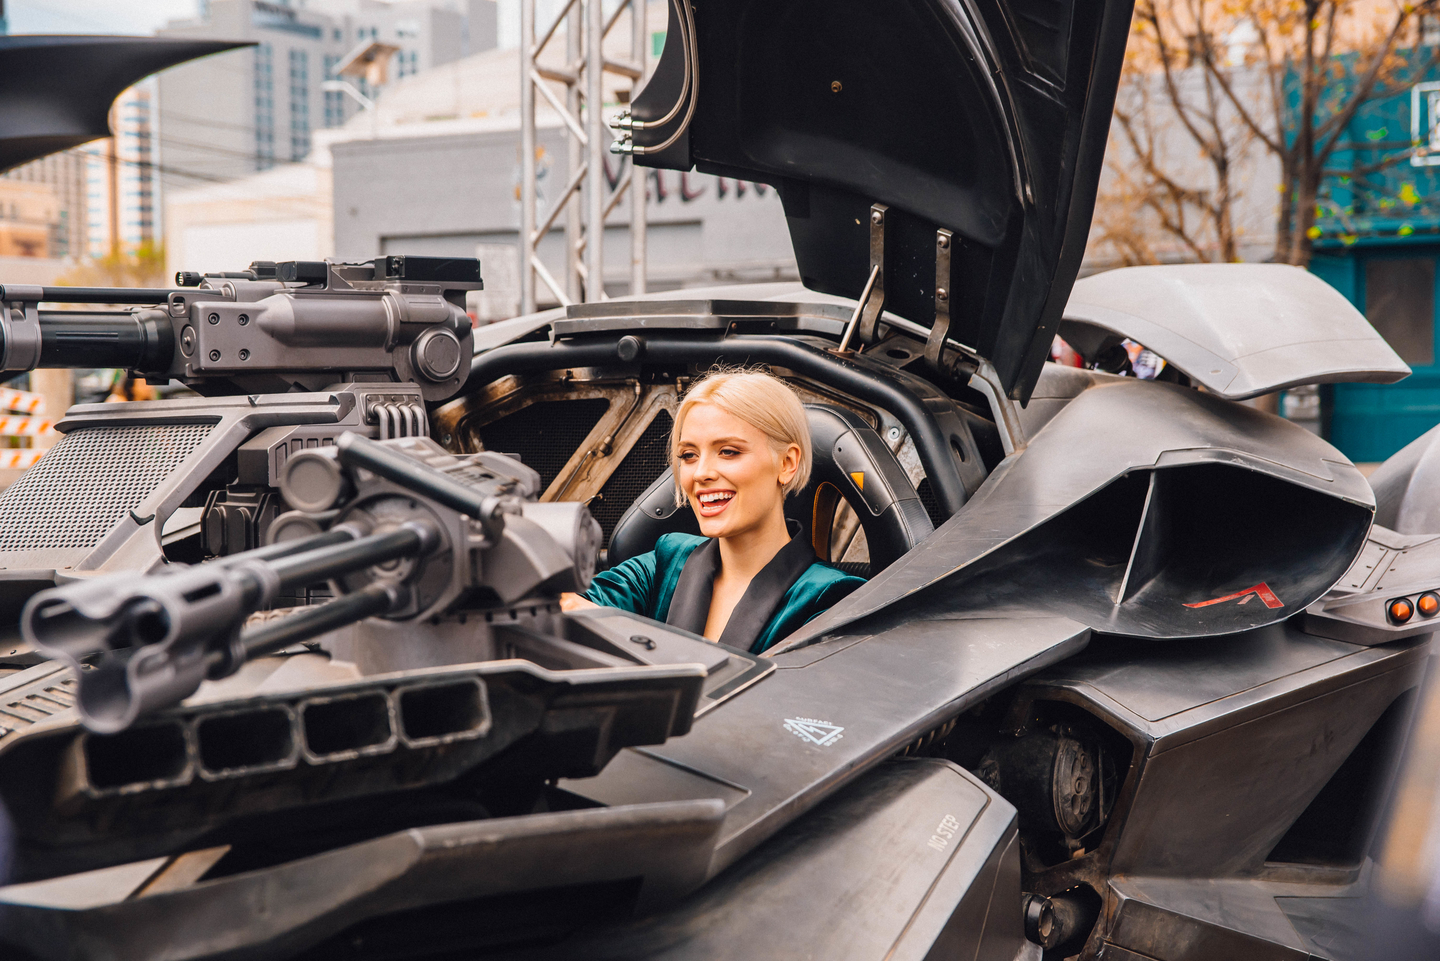 Wallis Day stopped by the DC Comics Pop Culture Experience, which is located at 717 Red River and runs through Sunday. Photo by Jordan Hefler